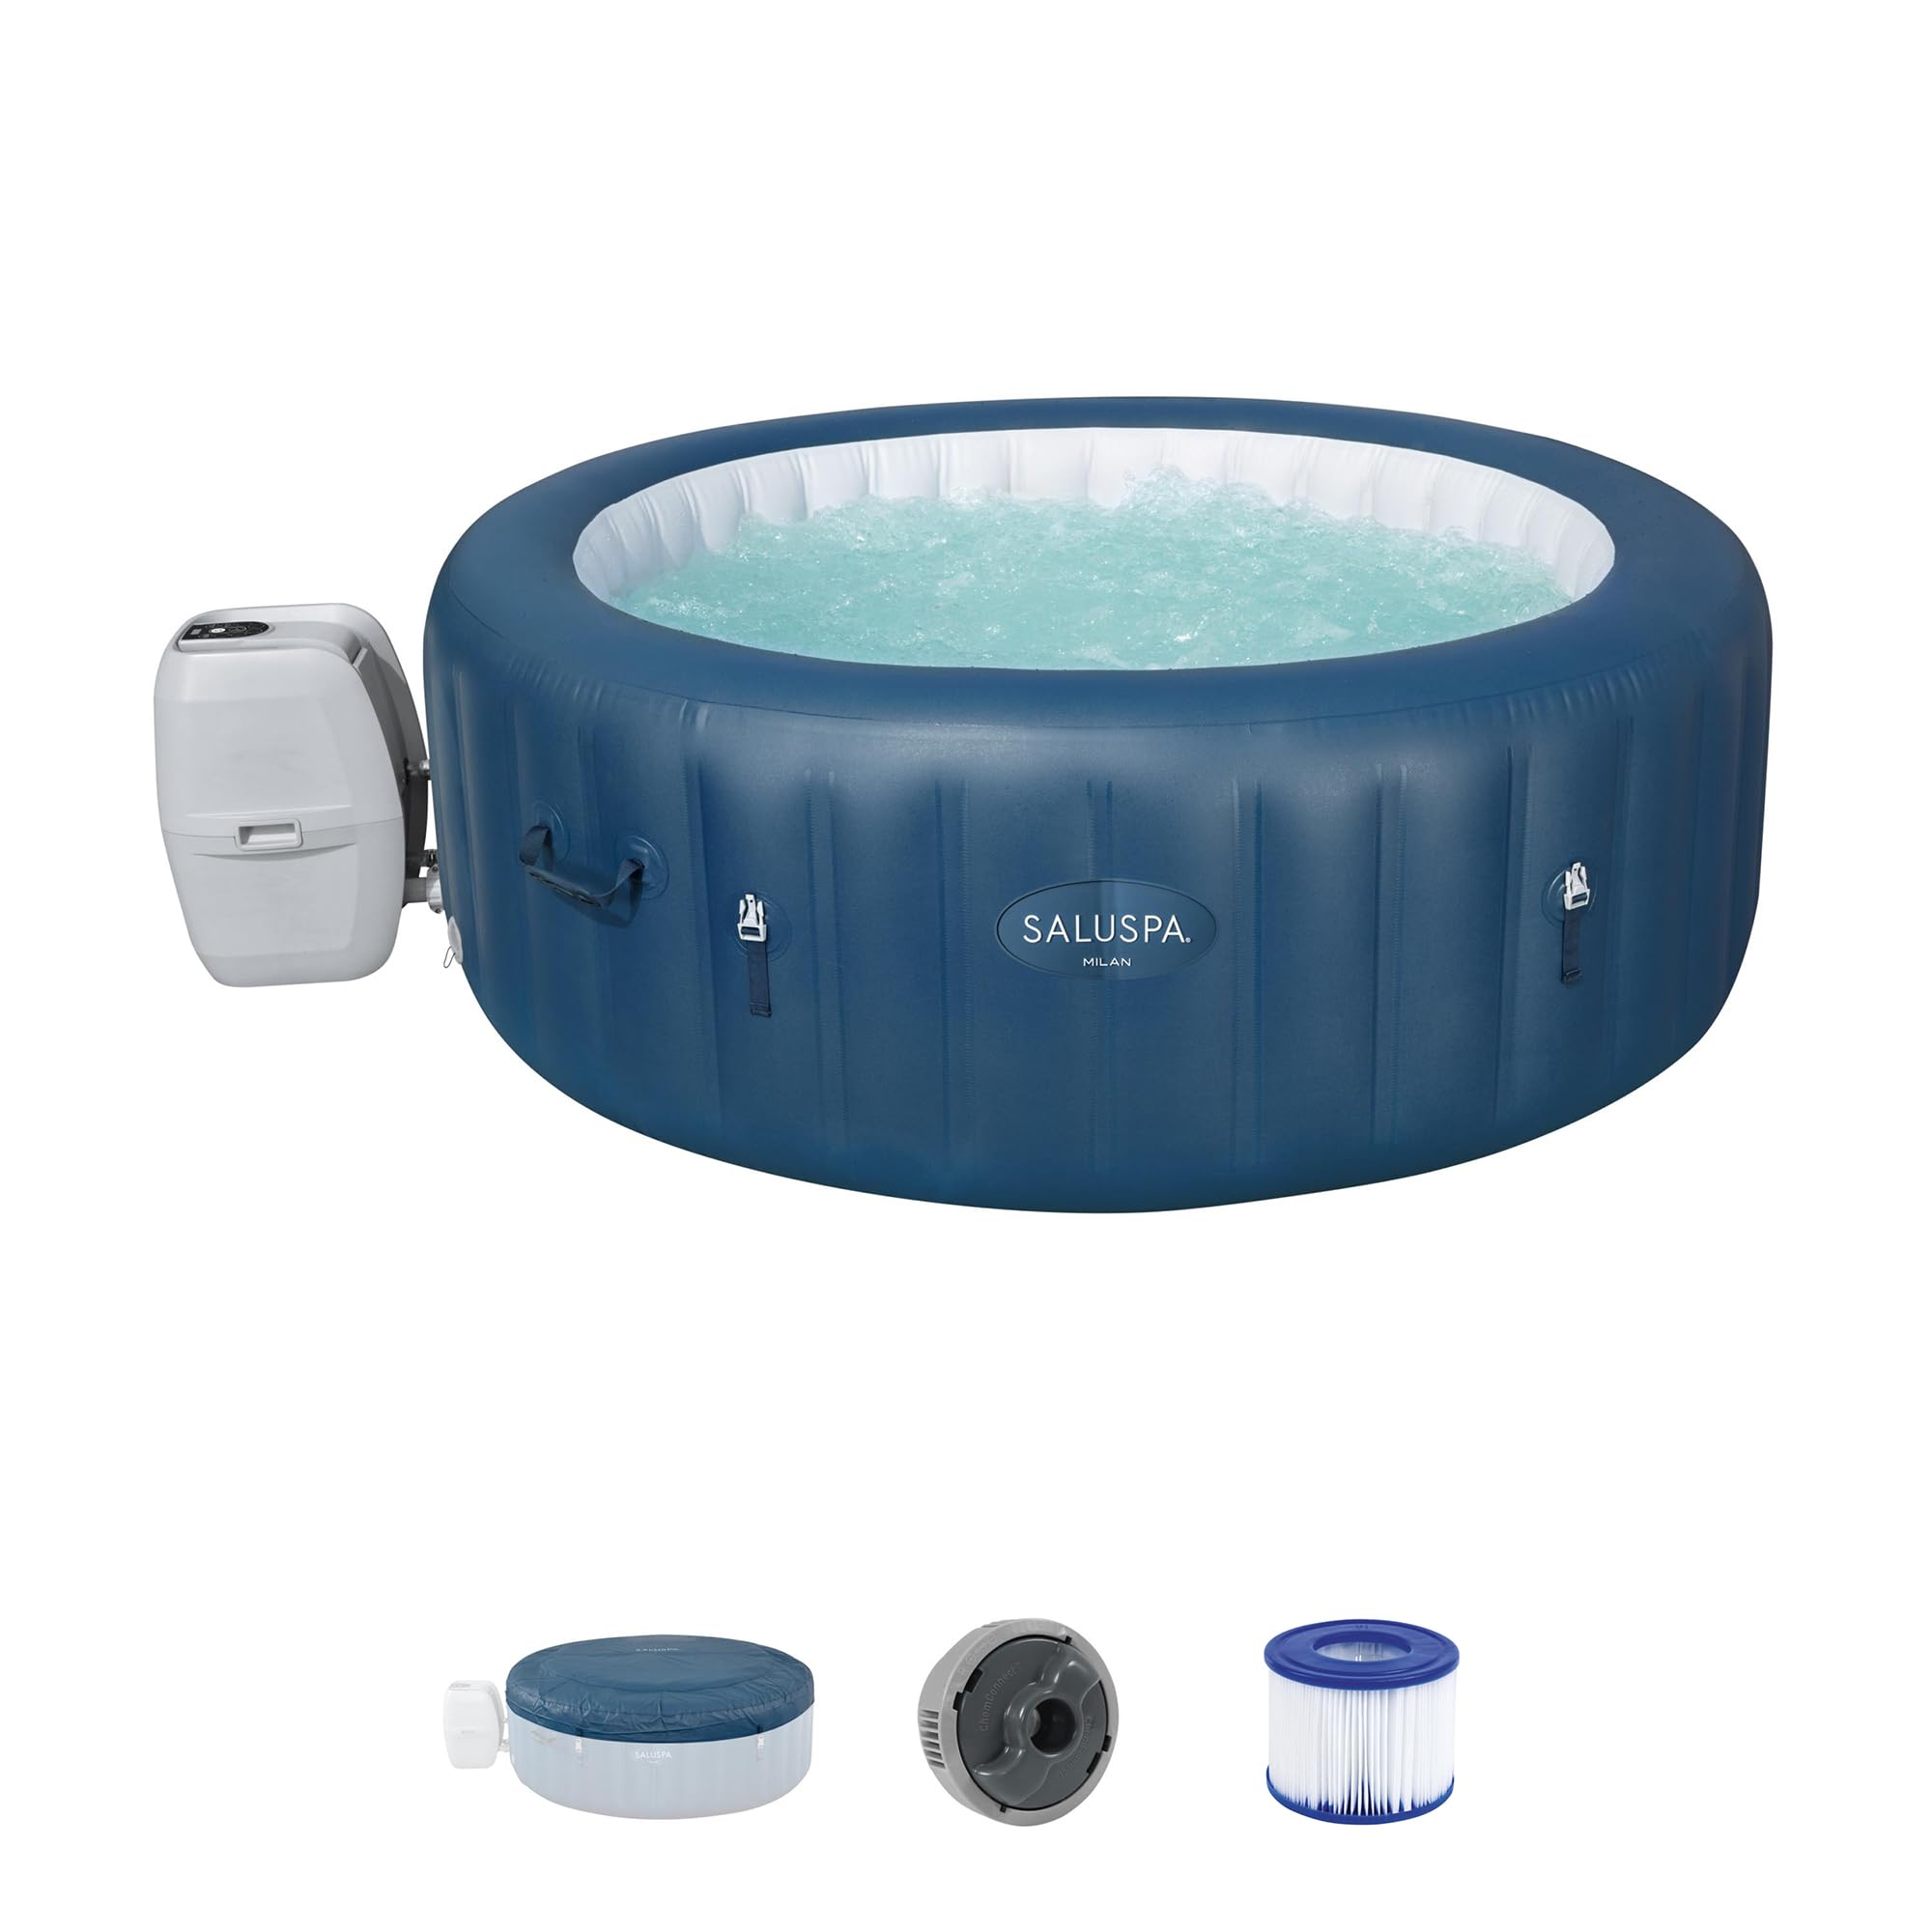 Bestway SaluSpa Milan AirJet Inflatable Hot Tub with 140 Soothing AirJets and 4-Pack of SaluSpa Underwater Non-Slip Spa Seat with Adjustable Legs